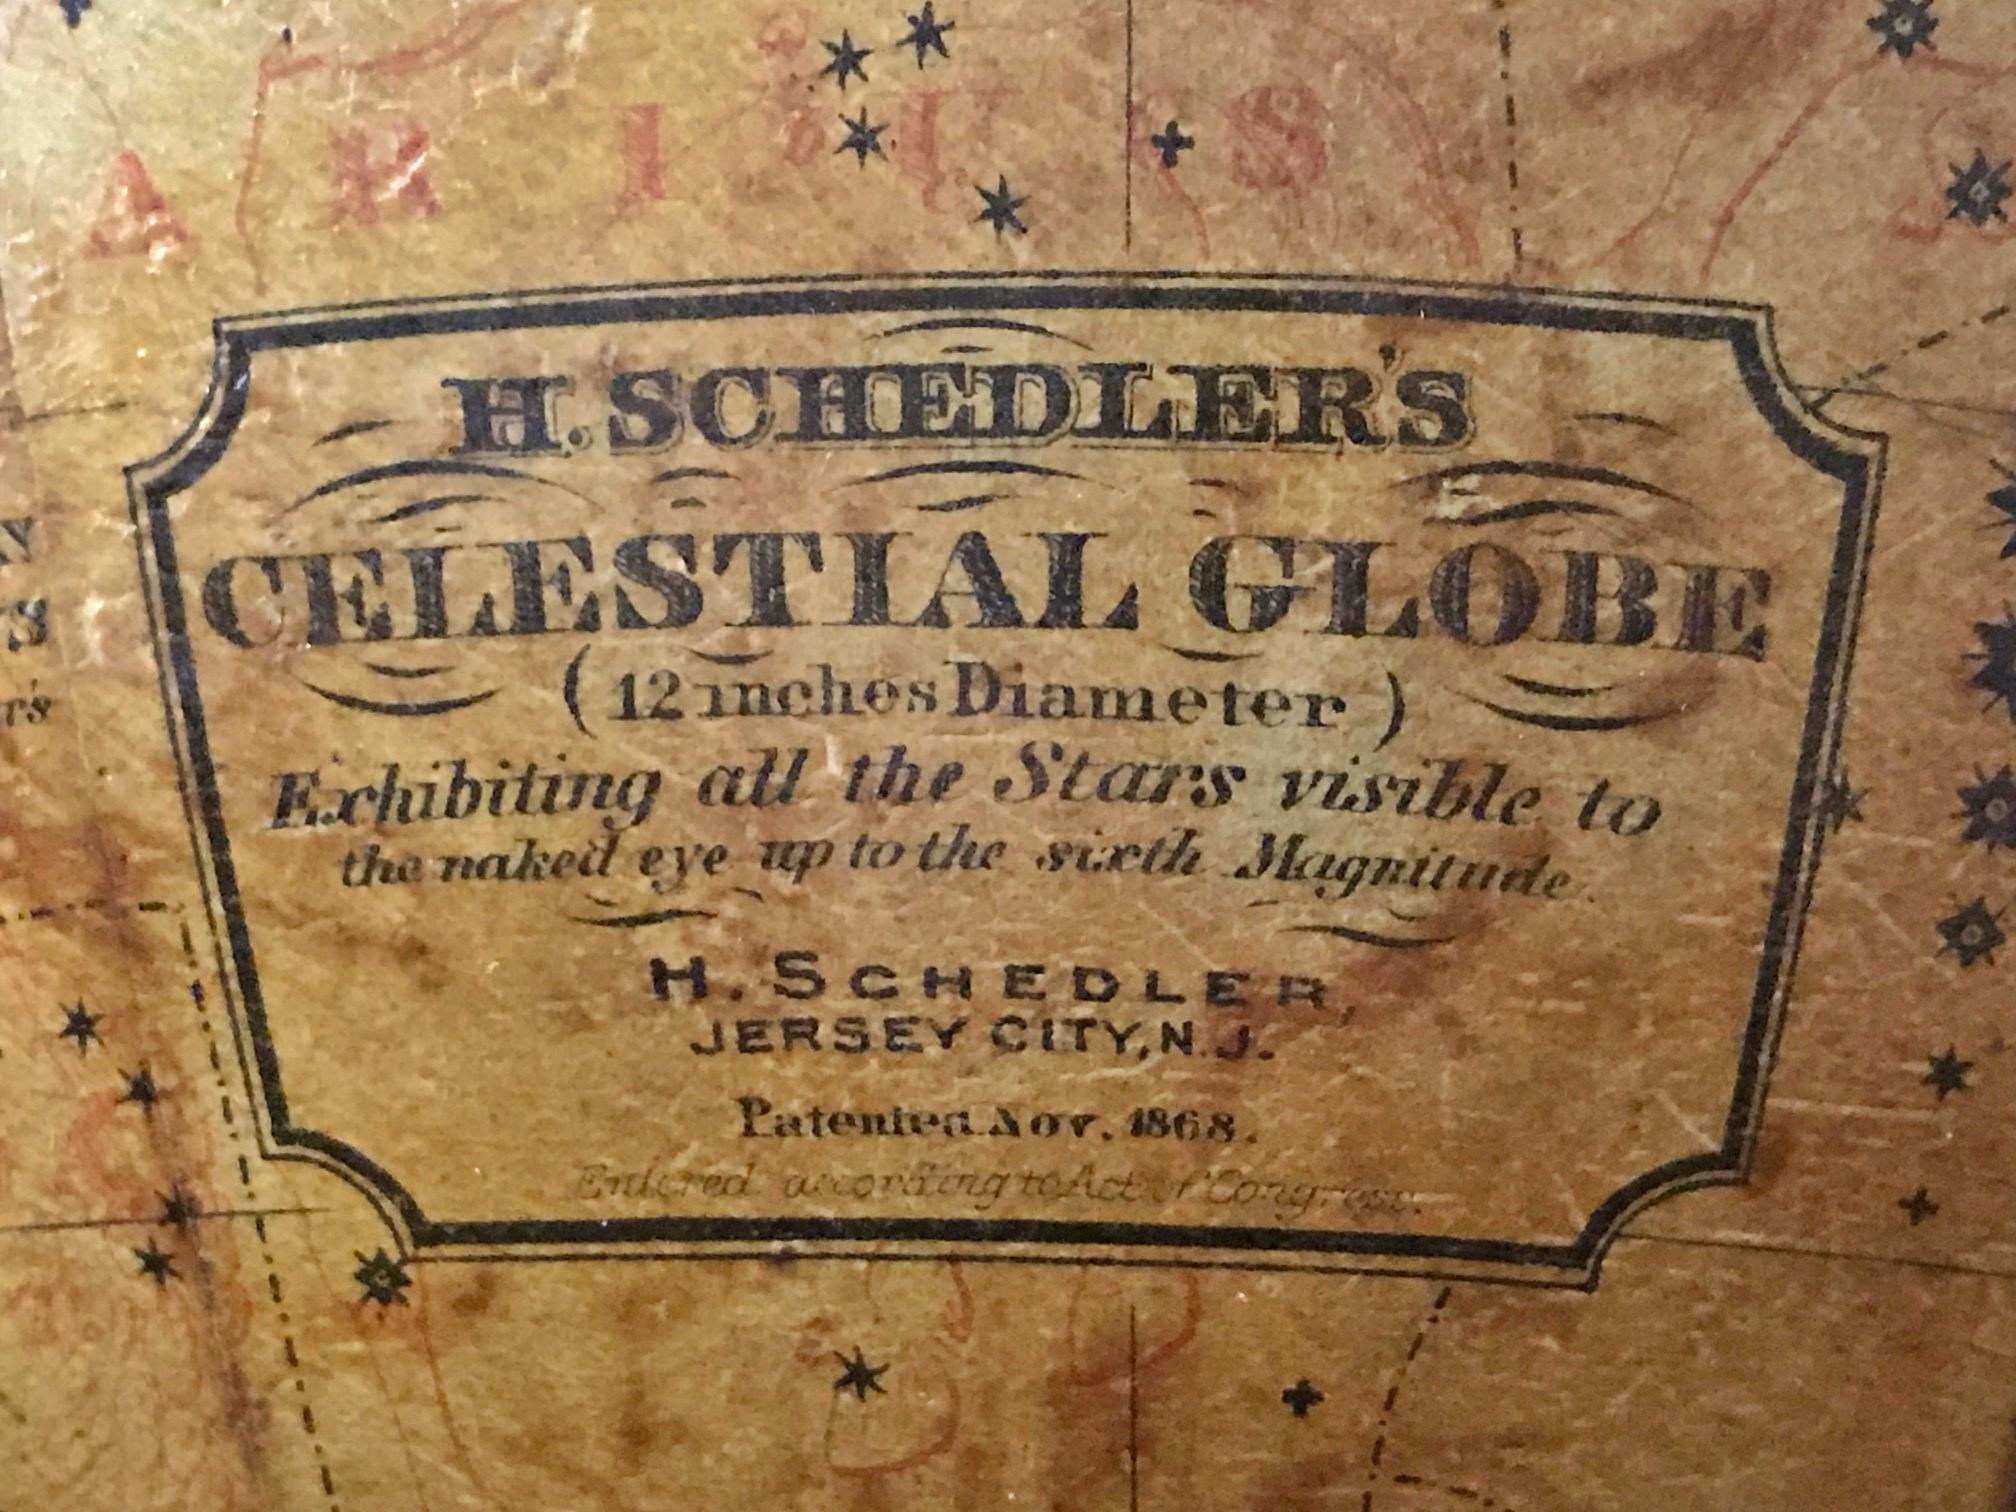 H. Schedler's celestial globe (12 inches diameter) exhibiting all the starts visible to naked eye up to the sixth magnitude; Patented Nov. 1868
H. Schedler, Jersey City, NJ H. Schedler, Jersey City, NJ H. Schedler, Jersey City, NJ, 1868.

Very